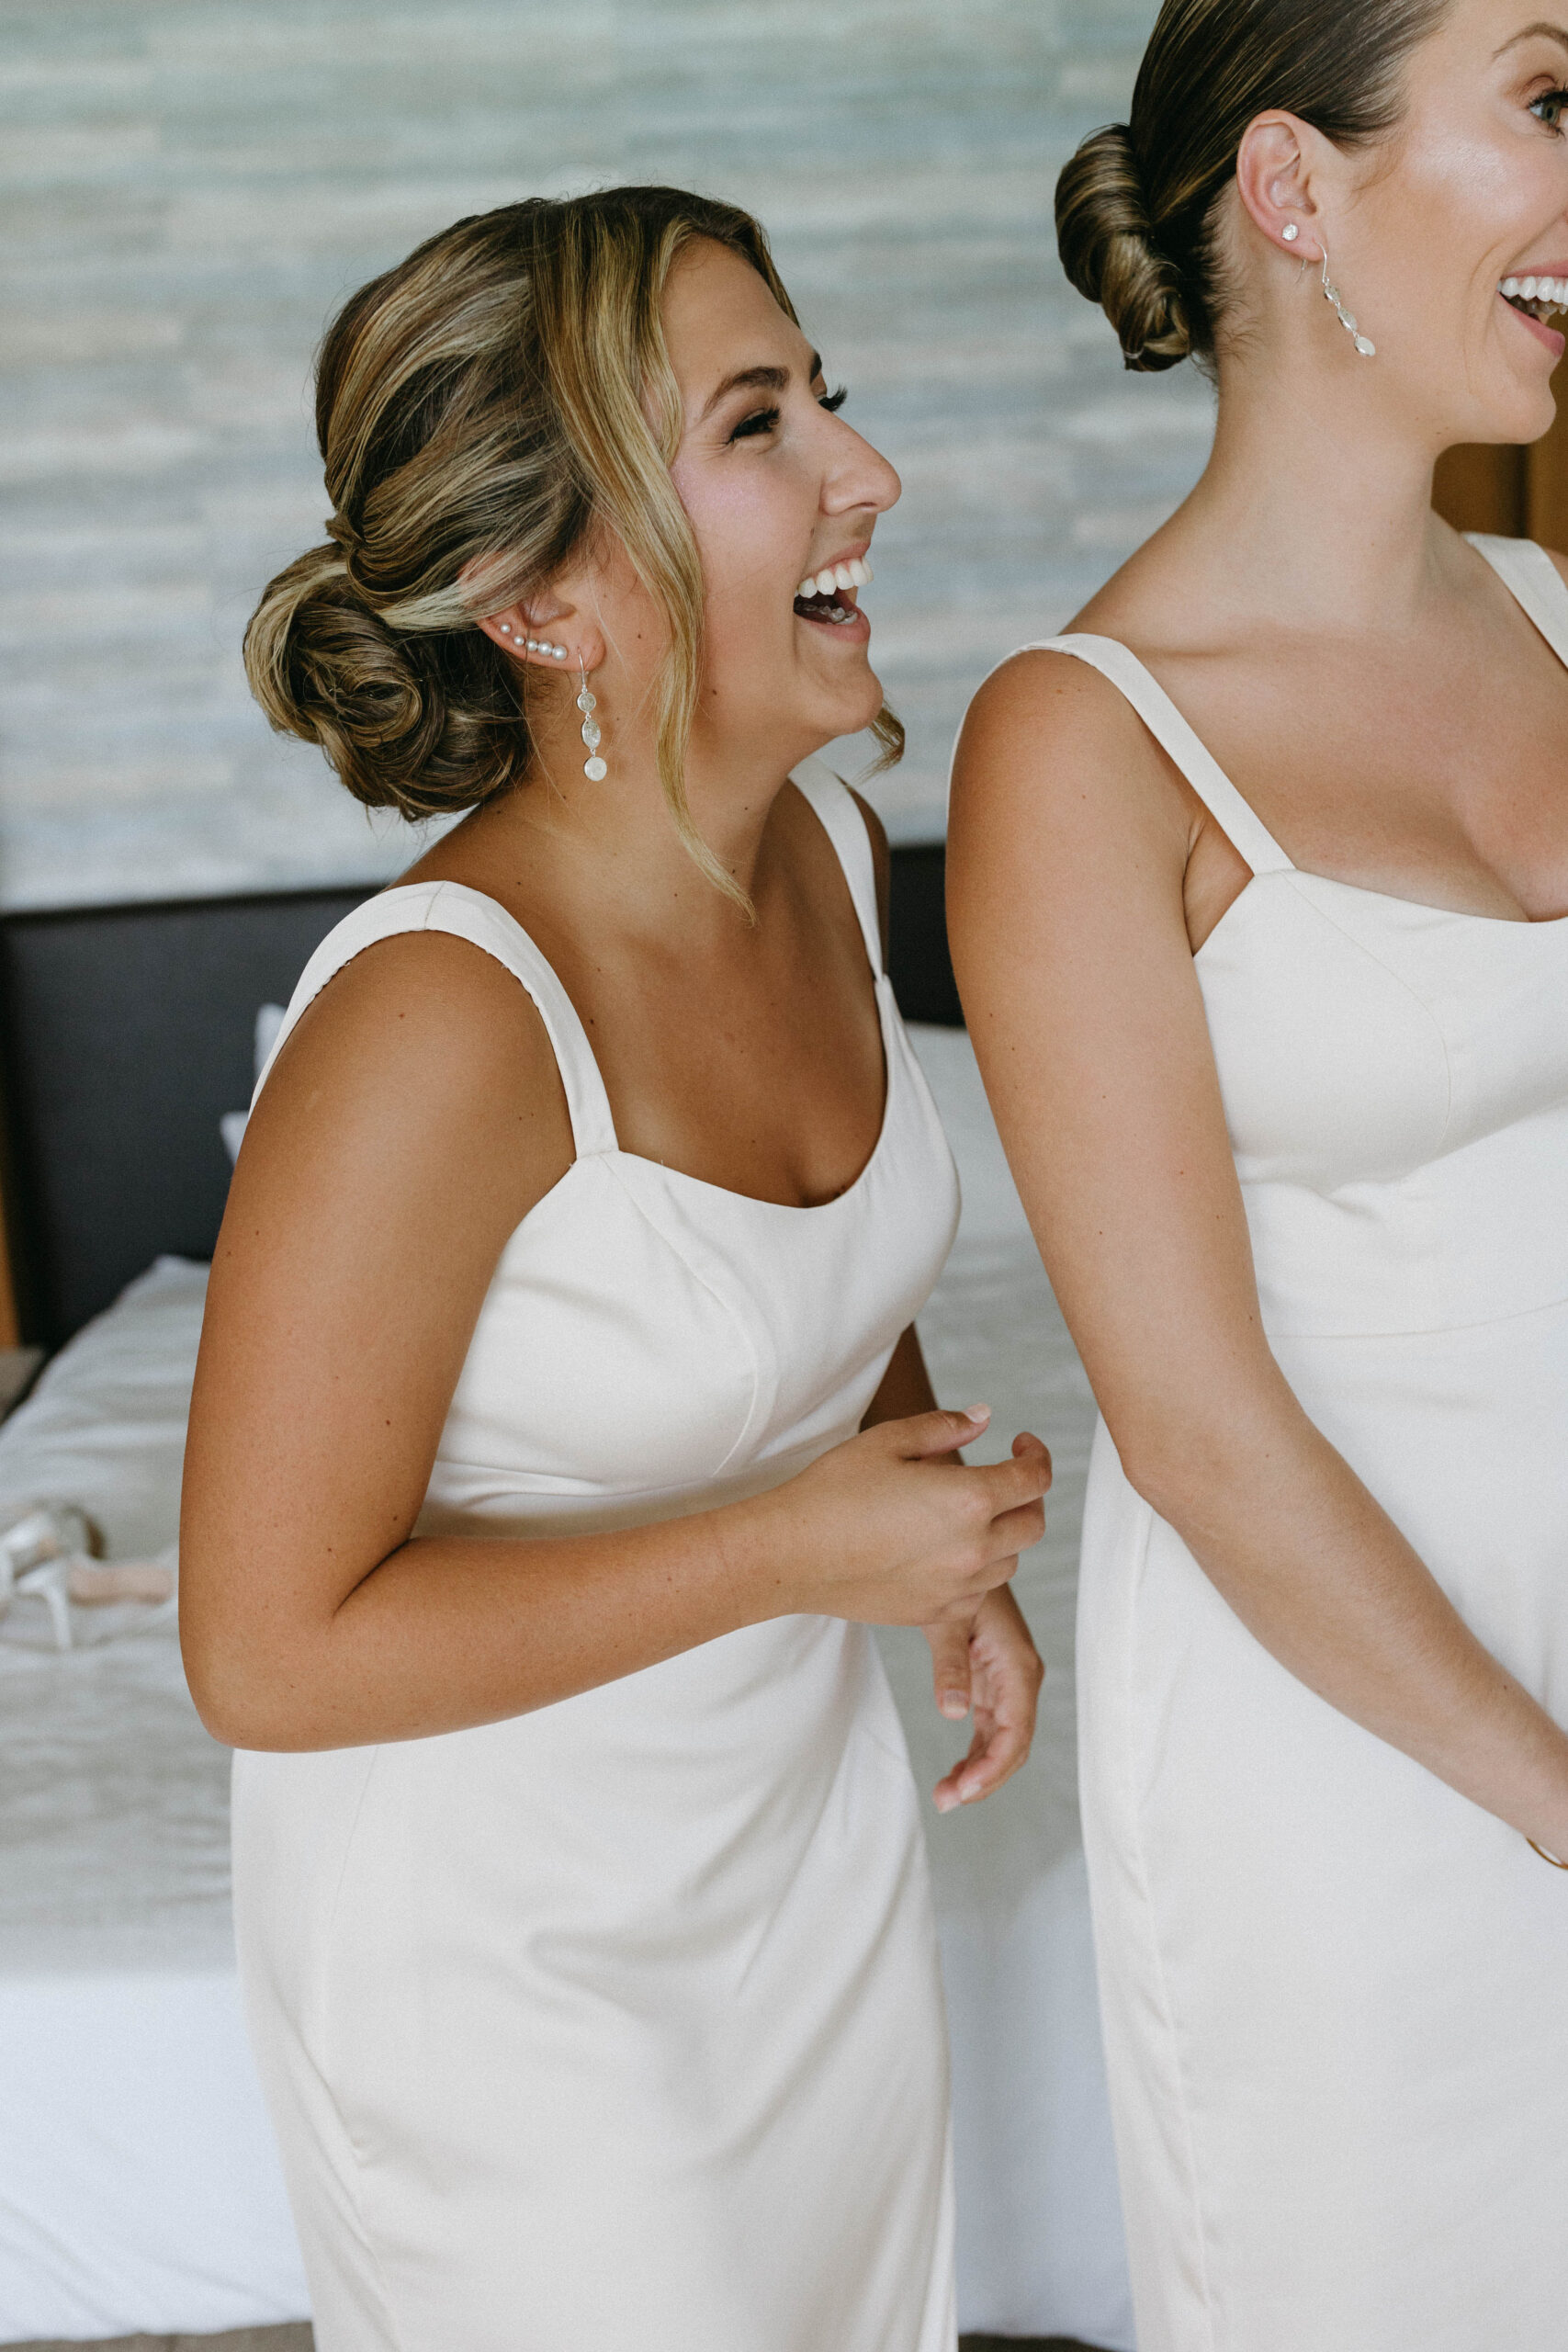 Two women who appear to be bridesmaids wearing white dresses and sterling silver jewelry smiling while looking at something off-camera.